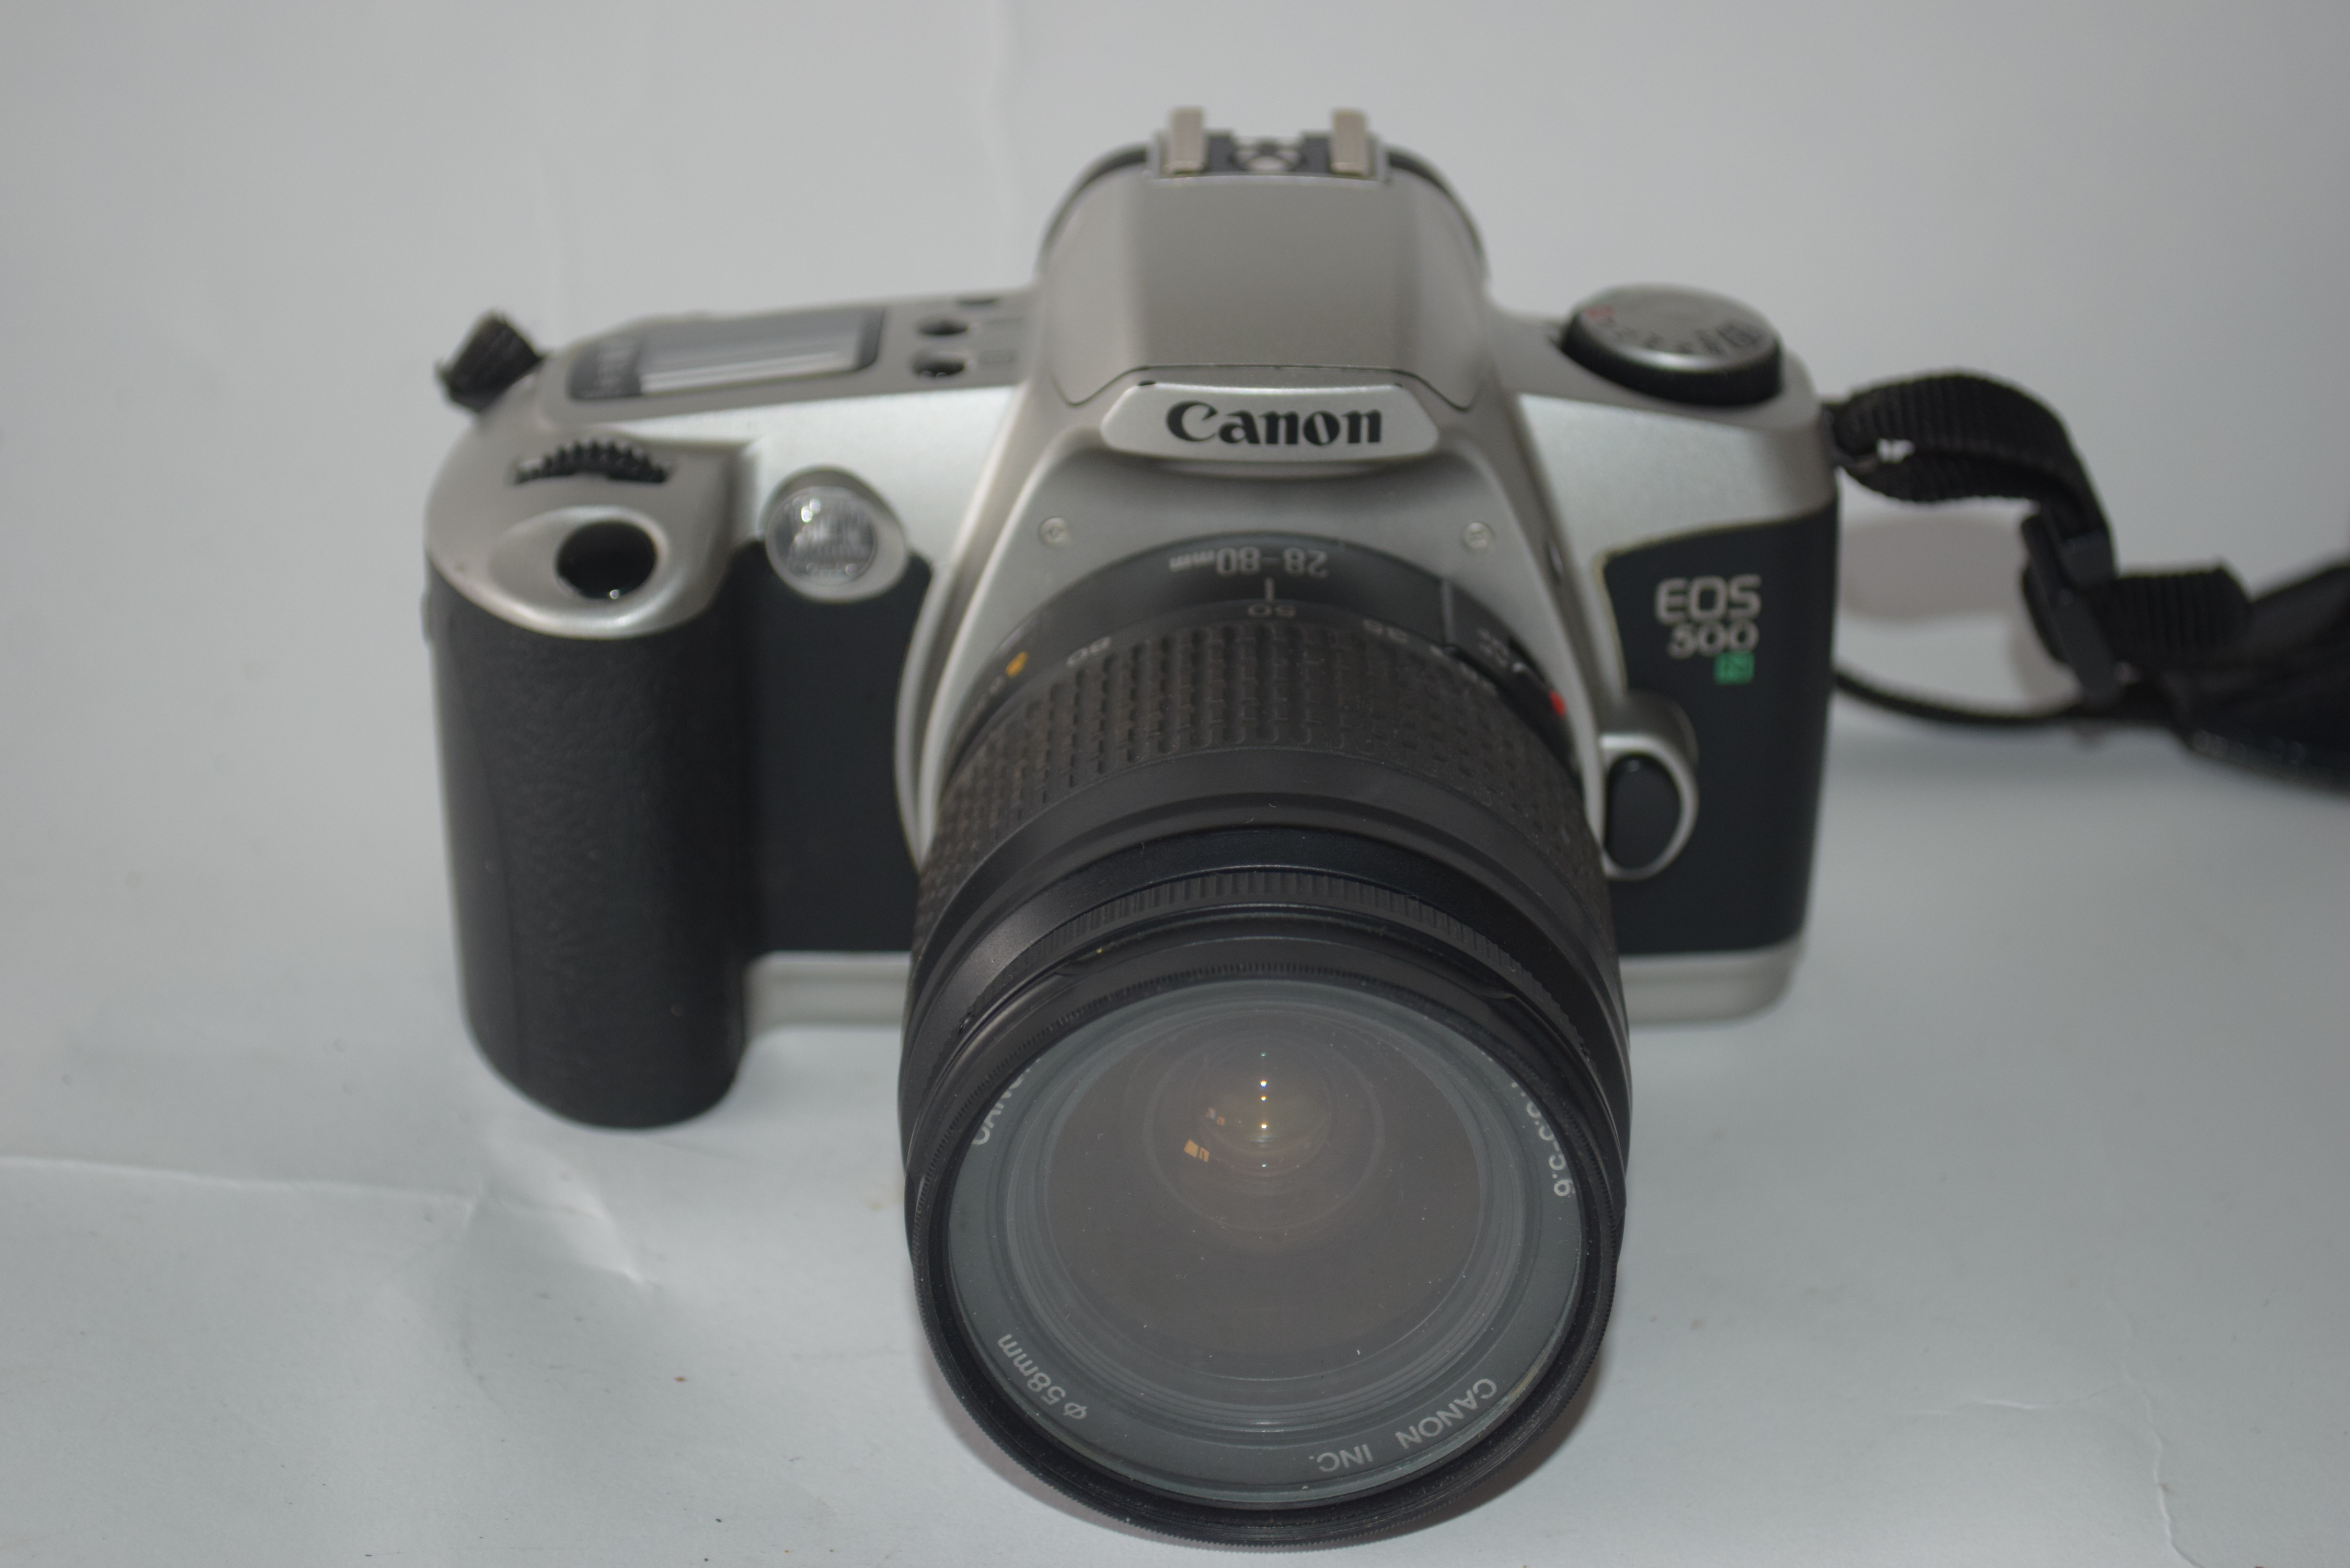 Canon EOS 500N film camera with manual and case together with Canon zoom lens EF28-80mm